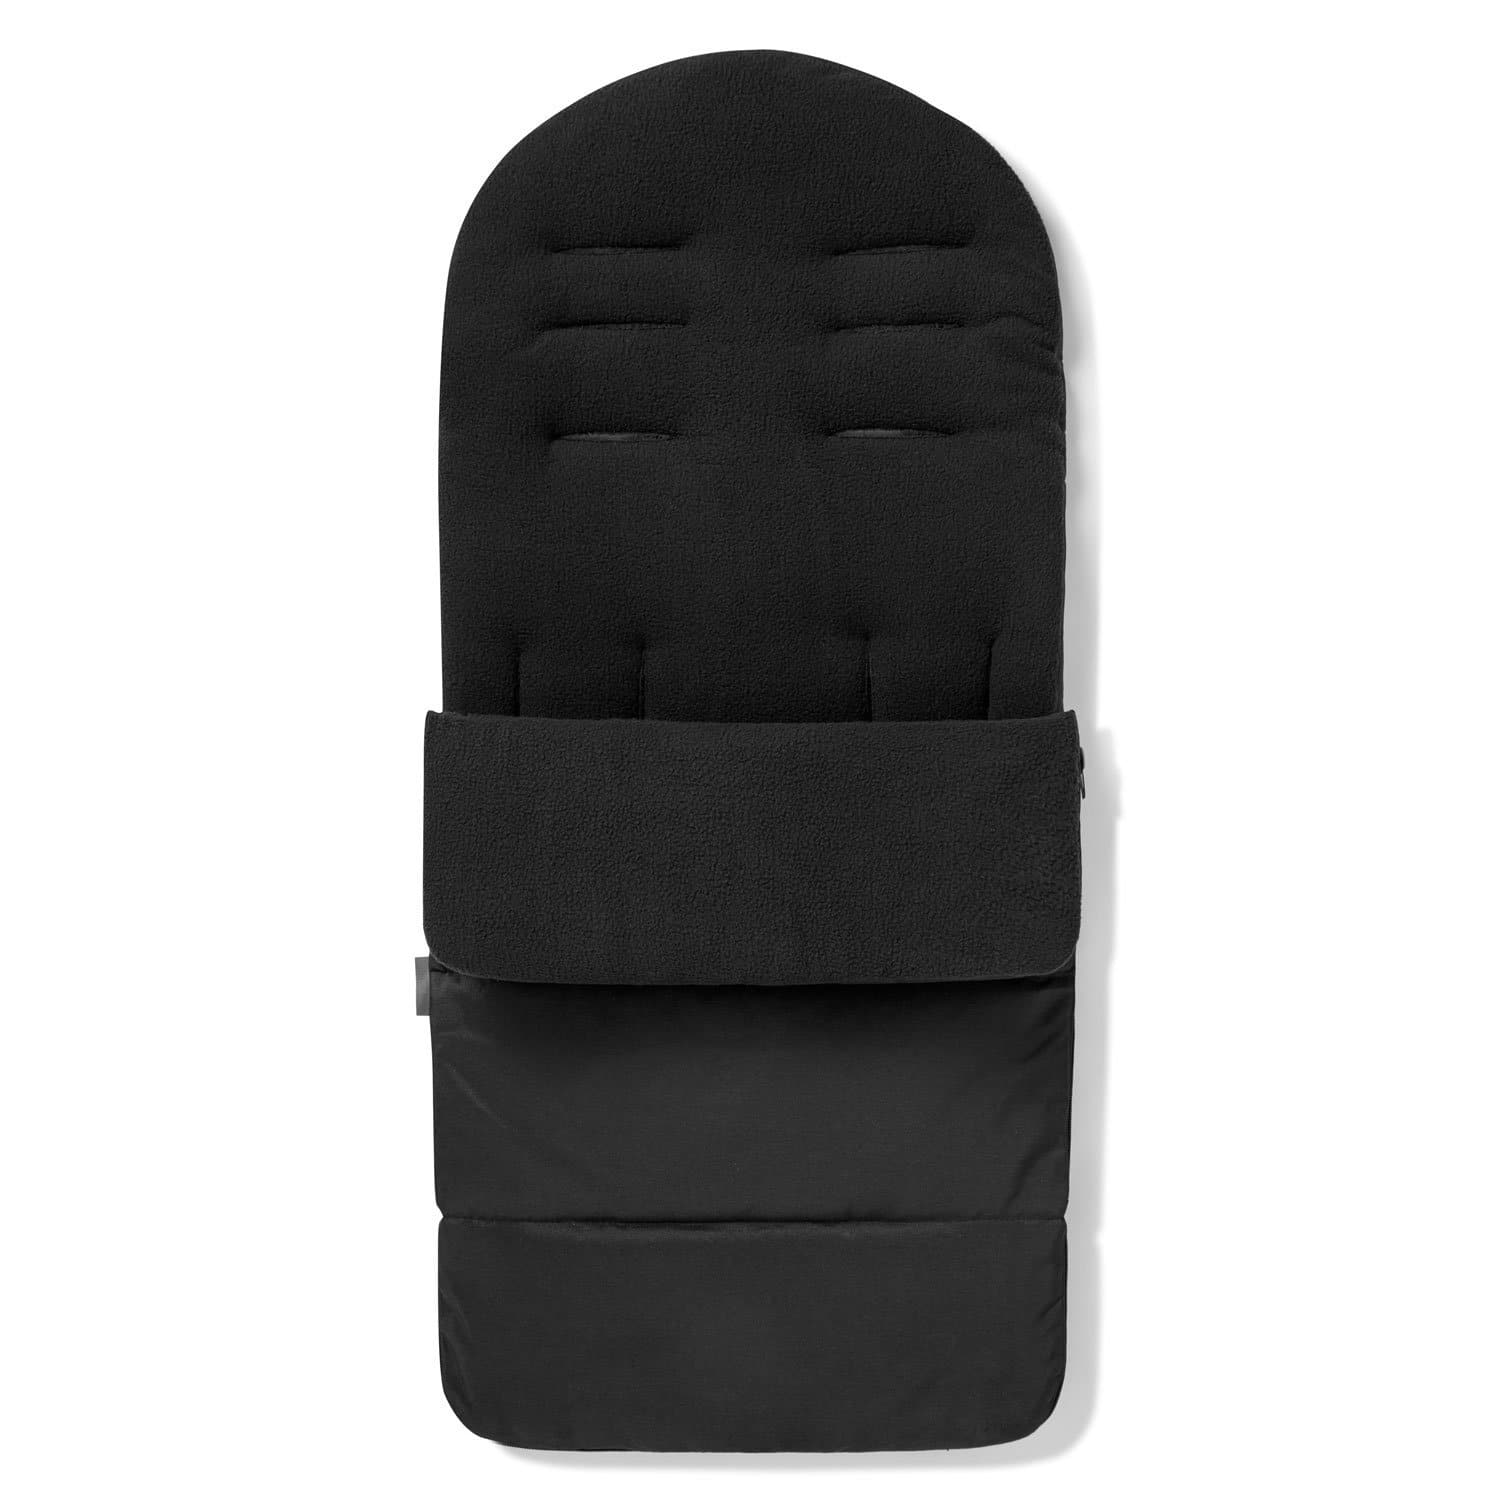 Premium Footmuff / Cosy Toes Compatible with Pericles - Black Jack / Fits All Models | For Your Little One